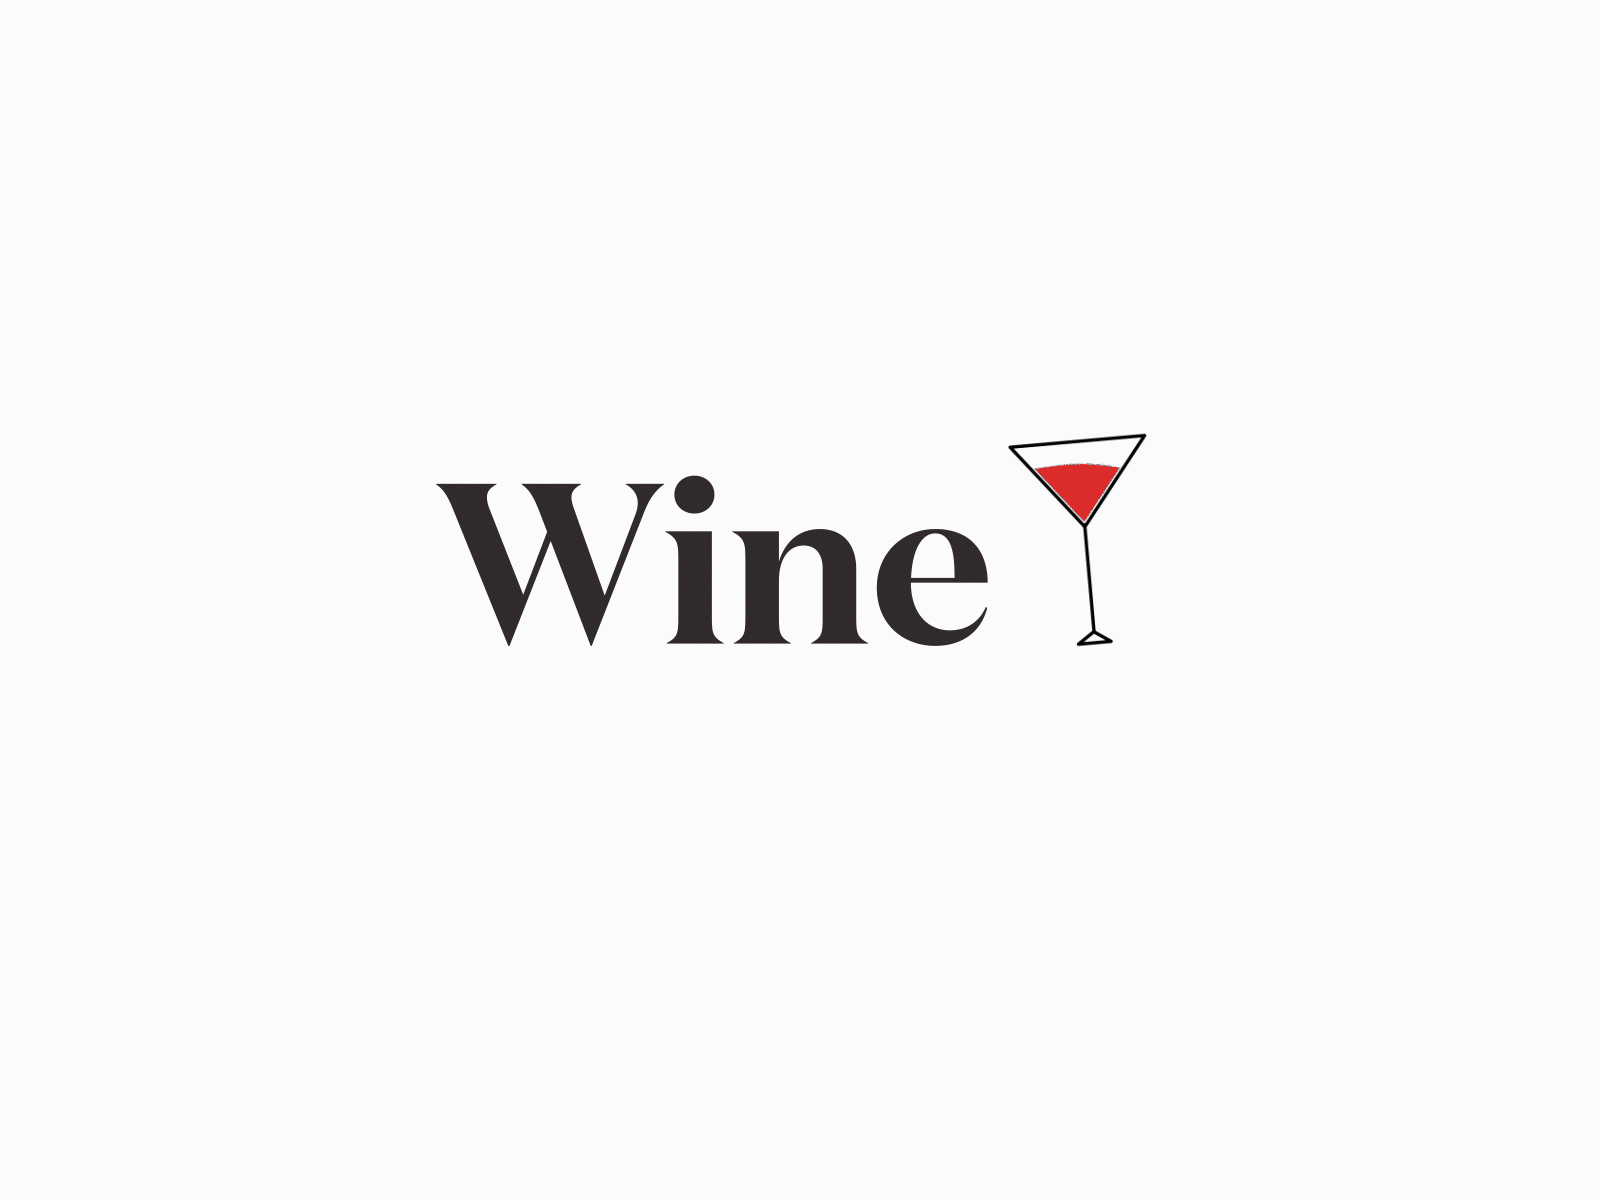 Wine animation ae after effects dailyui glass glass animation illustration loader motion design ui uidesign uiux uiux design ux uxdesign wine wine animation wine glass